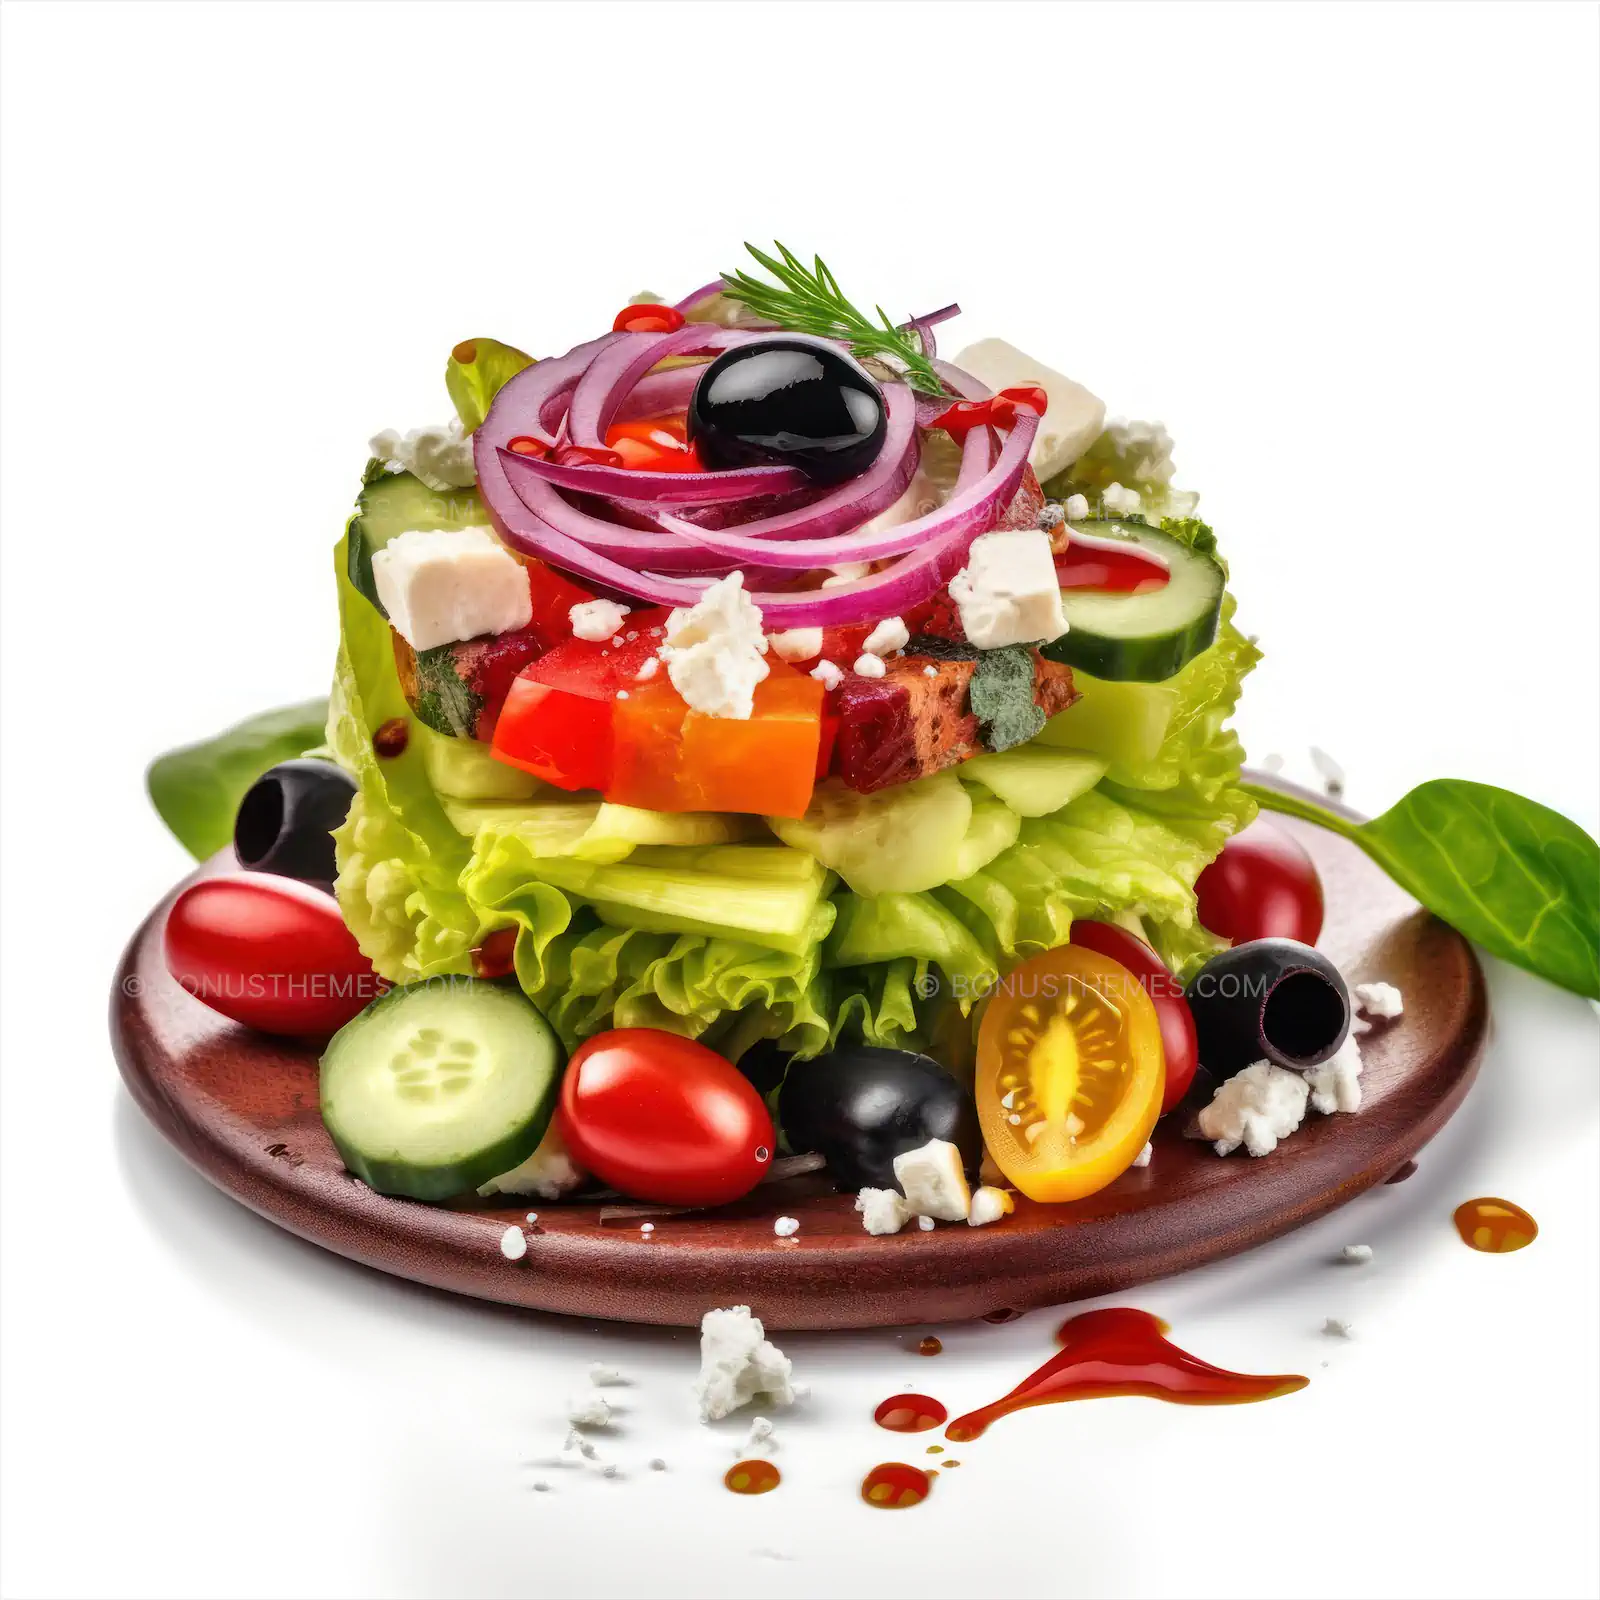 Greek salad with feta cheese and olives on a wooden plate